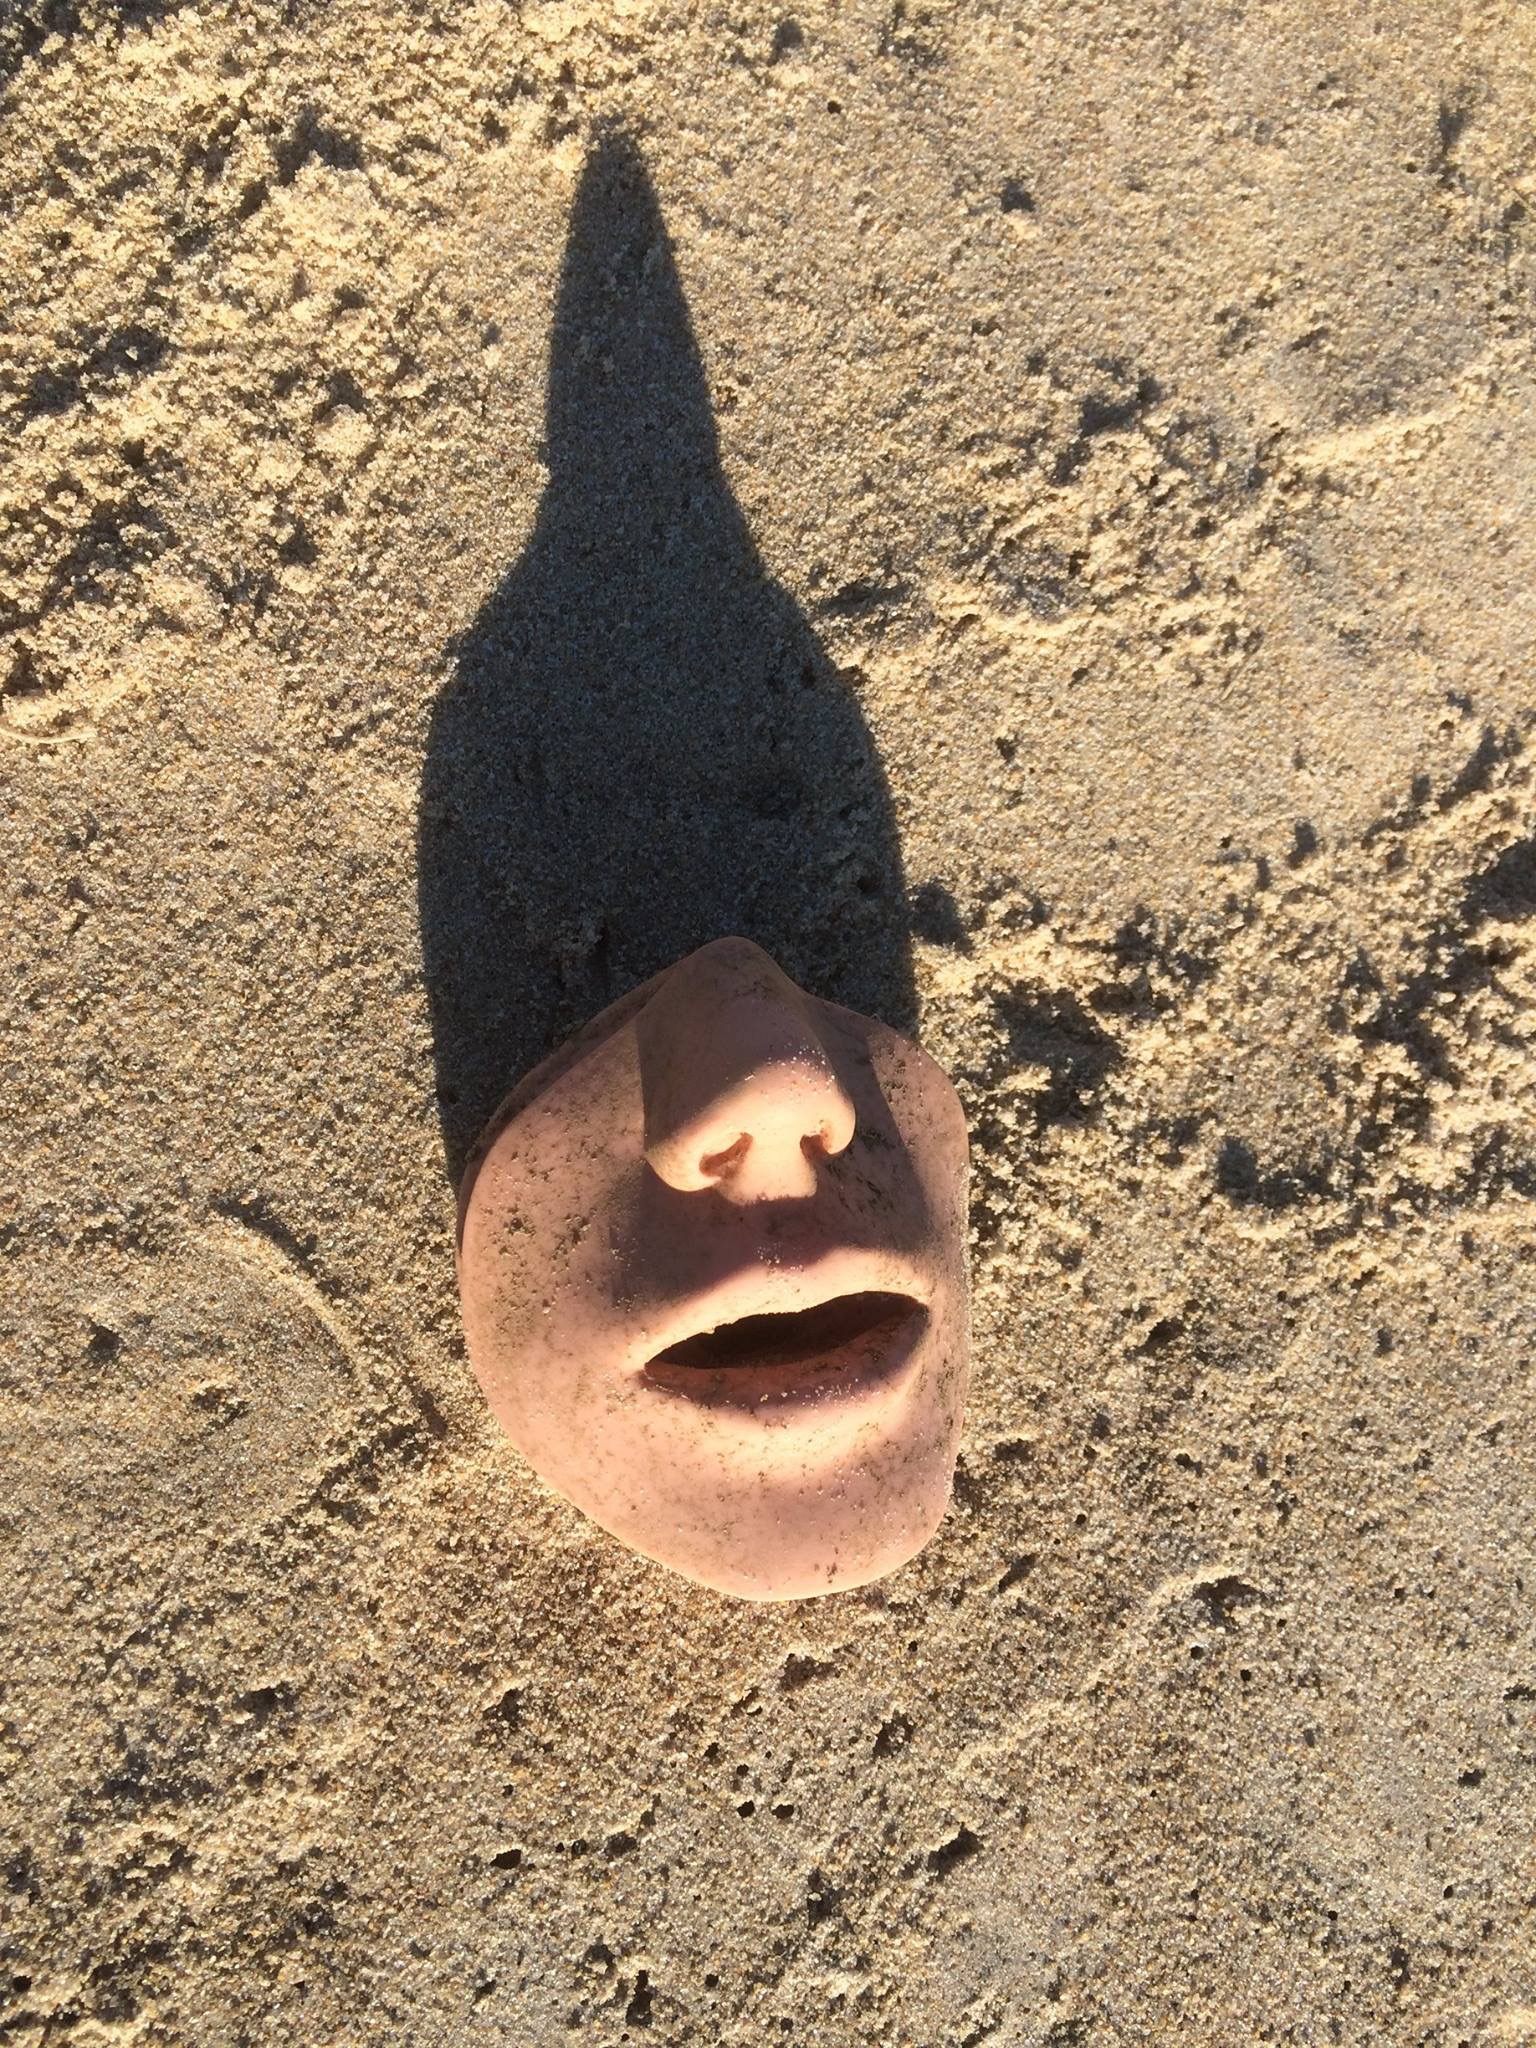 All the Bizarre Things Our Readers Have Found on the Beach - Atlas Obscura